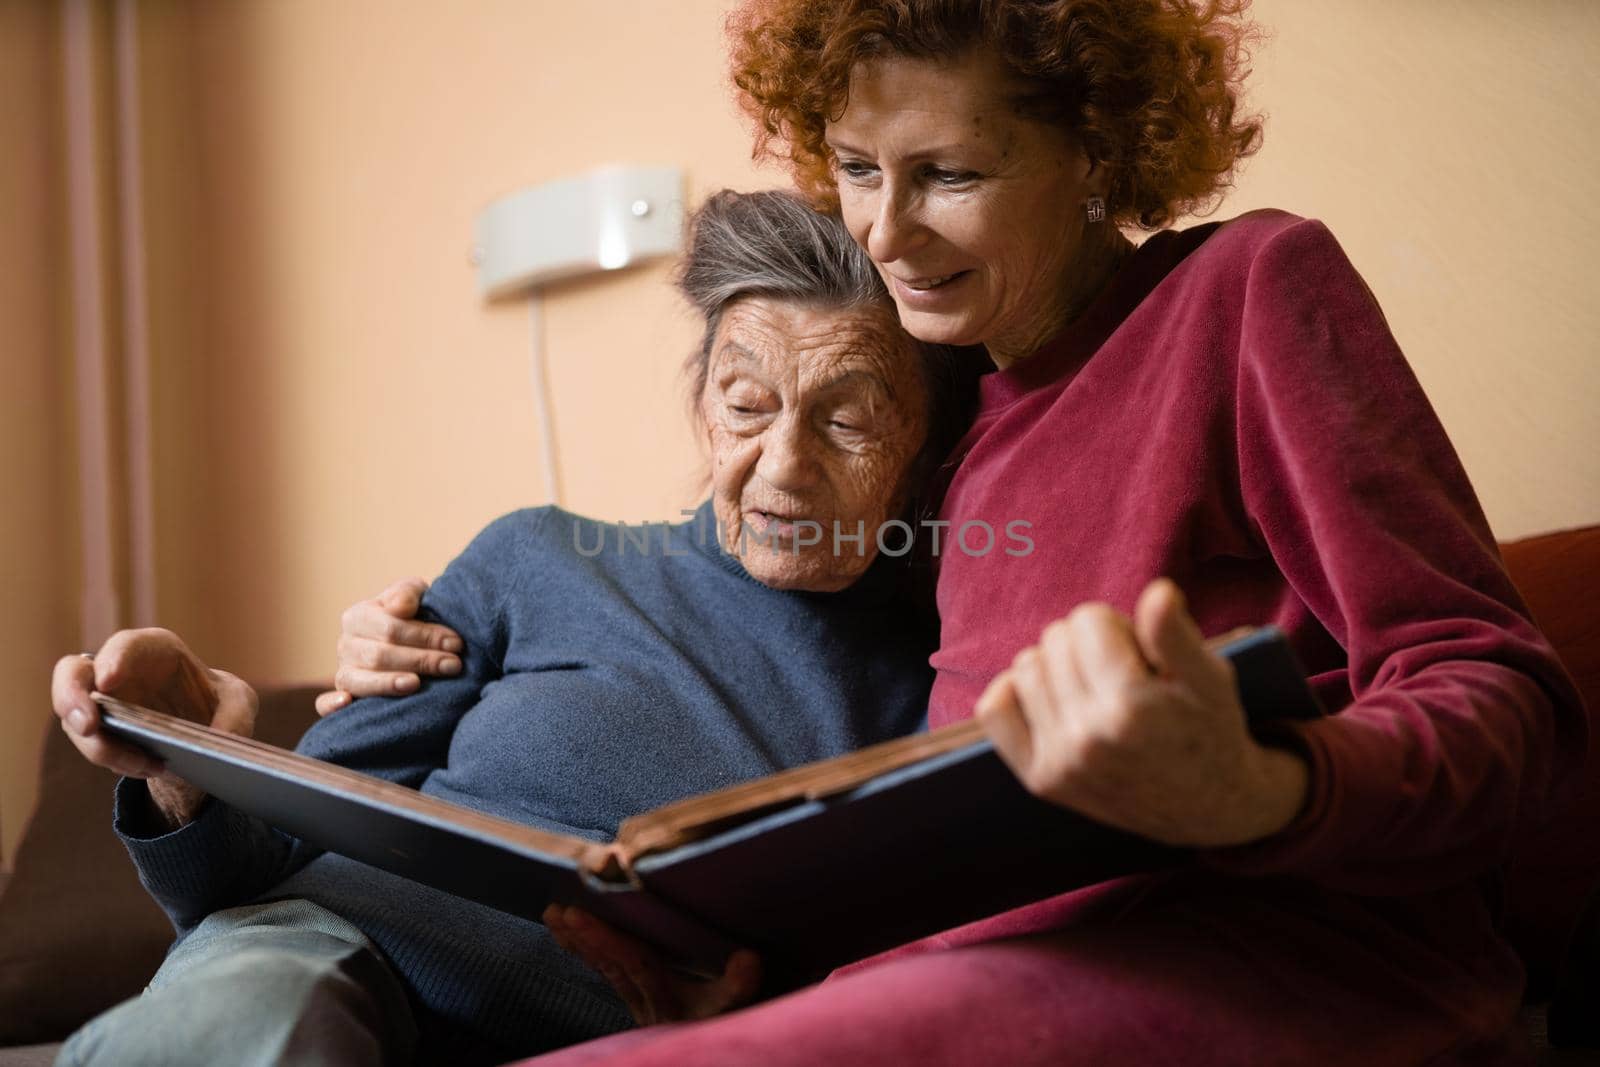 Senior woman and her adult daughter looking at photo album together on couch in living room, talking joyful discussing memories. Weekend with parents, family day, thanksgiving, mom's holiday by Tomashevska